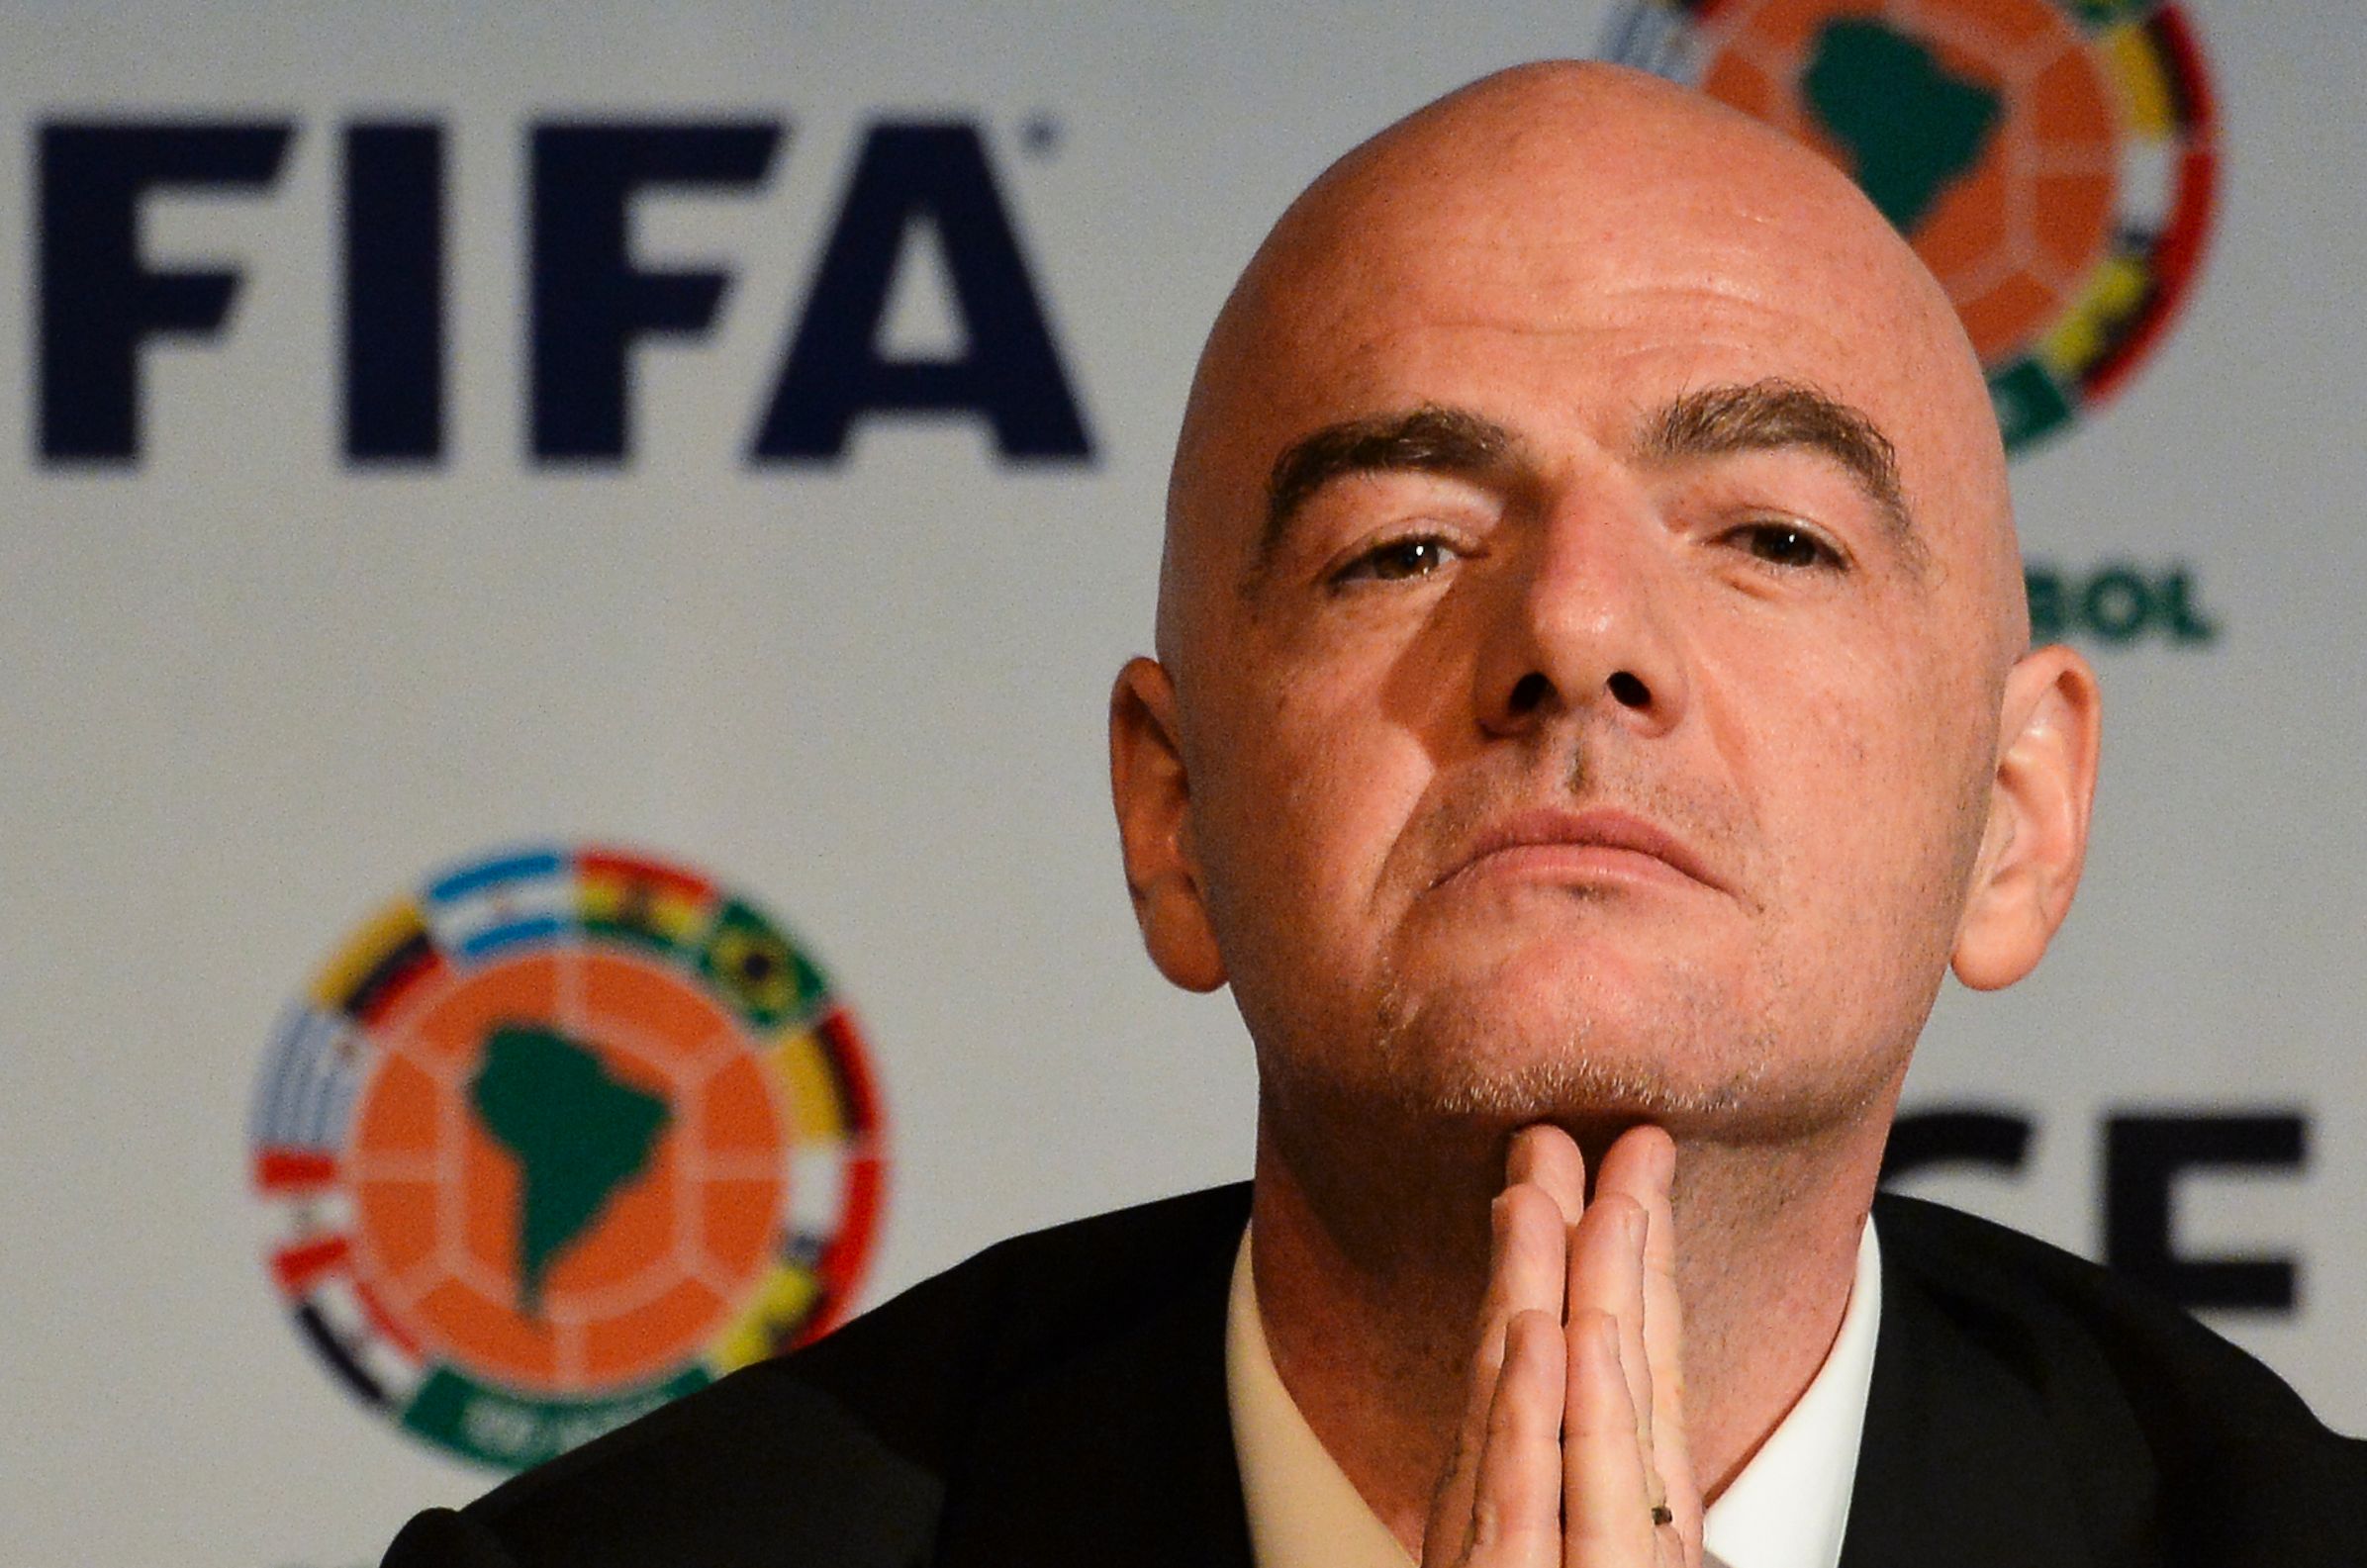 Infantino "dismayed" after name found in Panama Papers